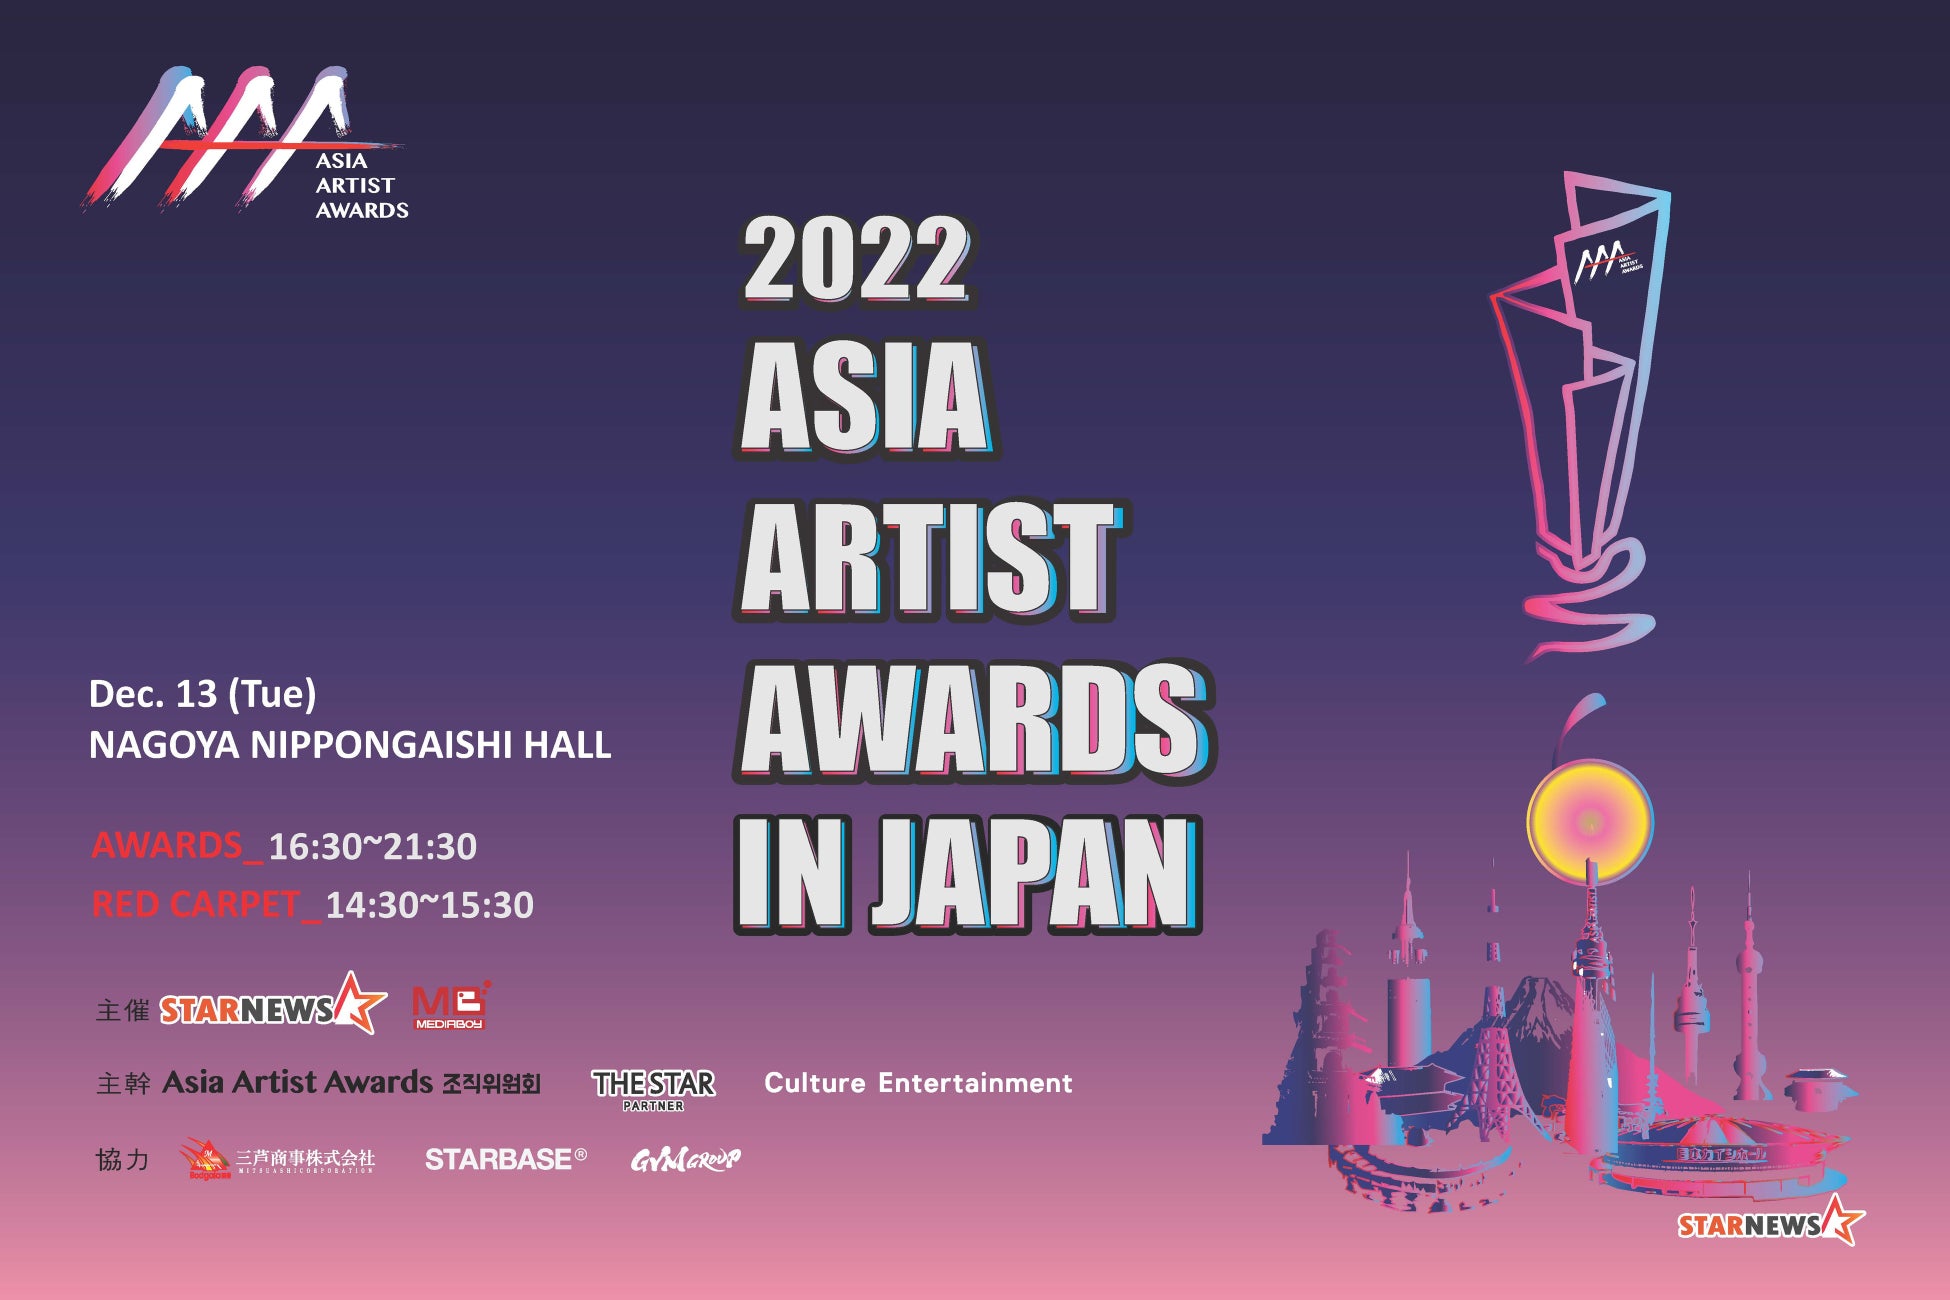 「2022 Asia Artist Awards in Japan」出演アーティスト発表【第７弾】THE RAMPAGE from EXILE TRIBE 、BE:FIRST 出演決定！のサブ画像2